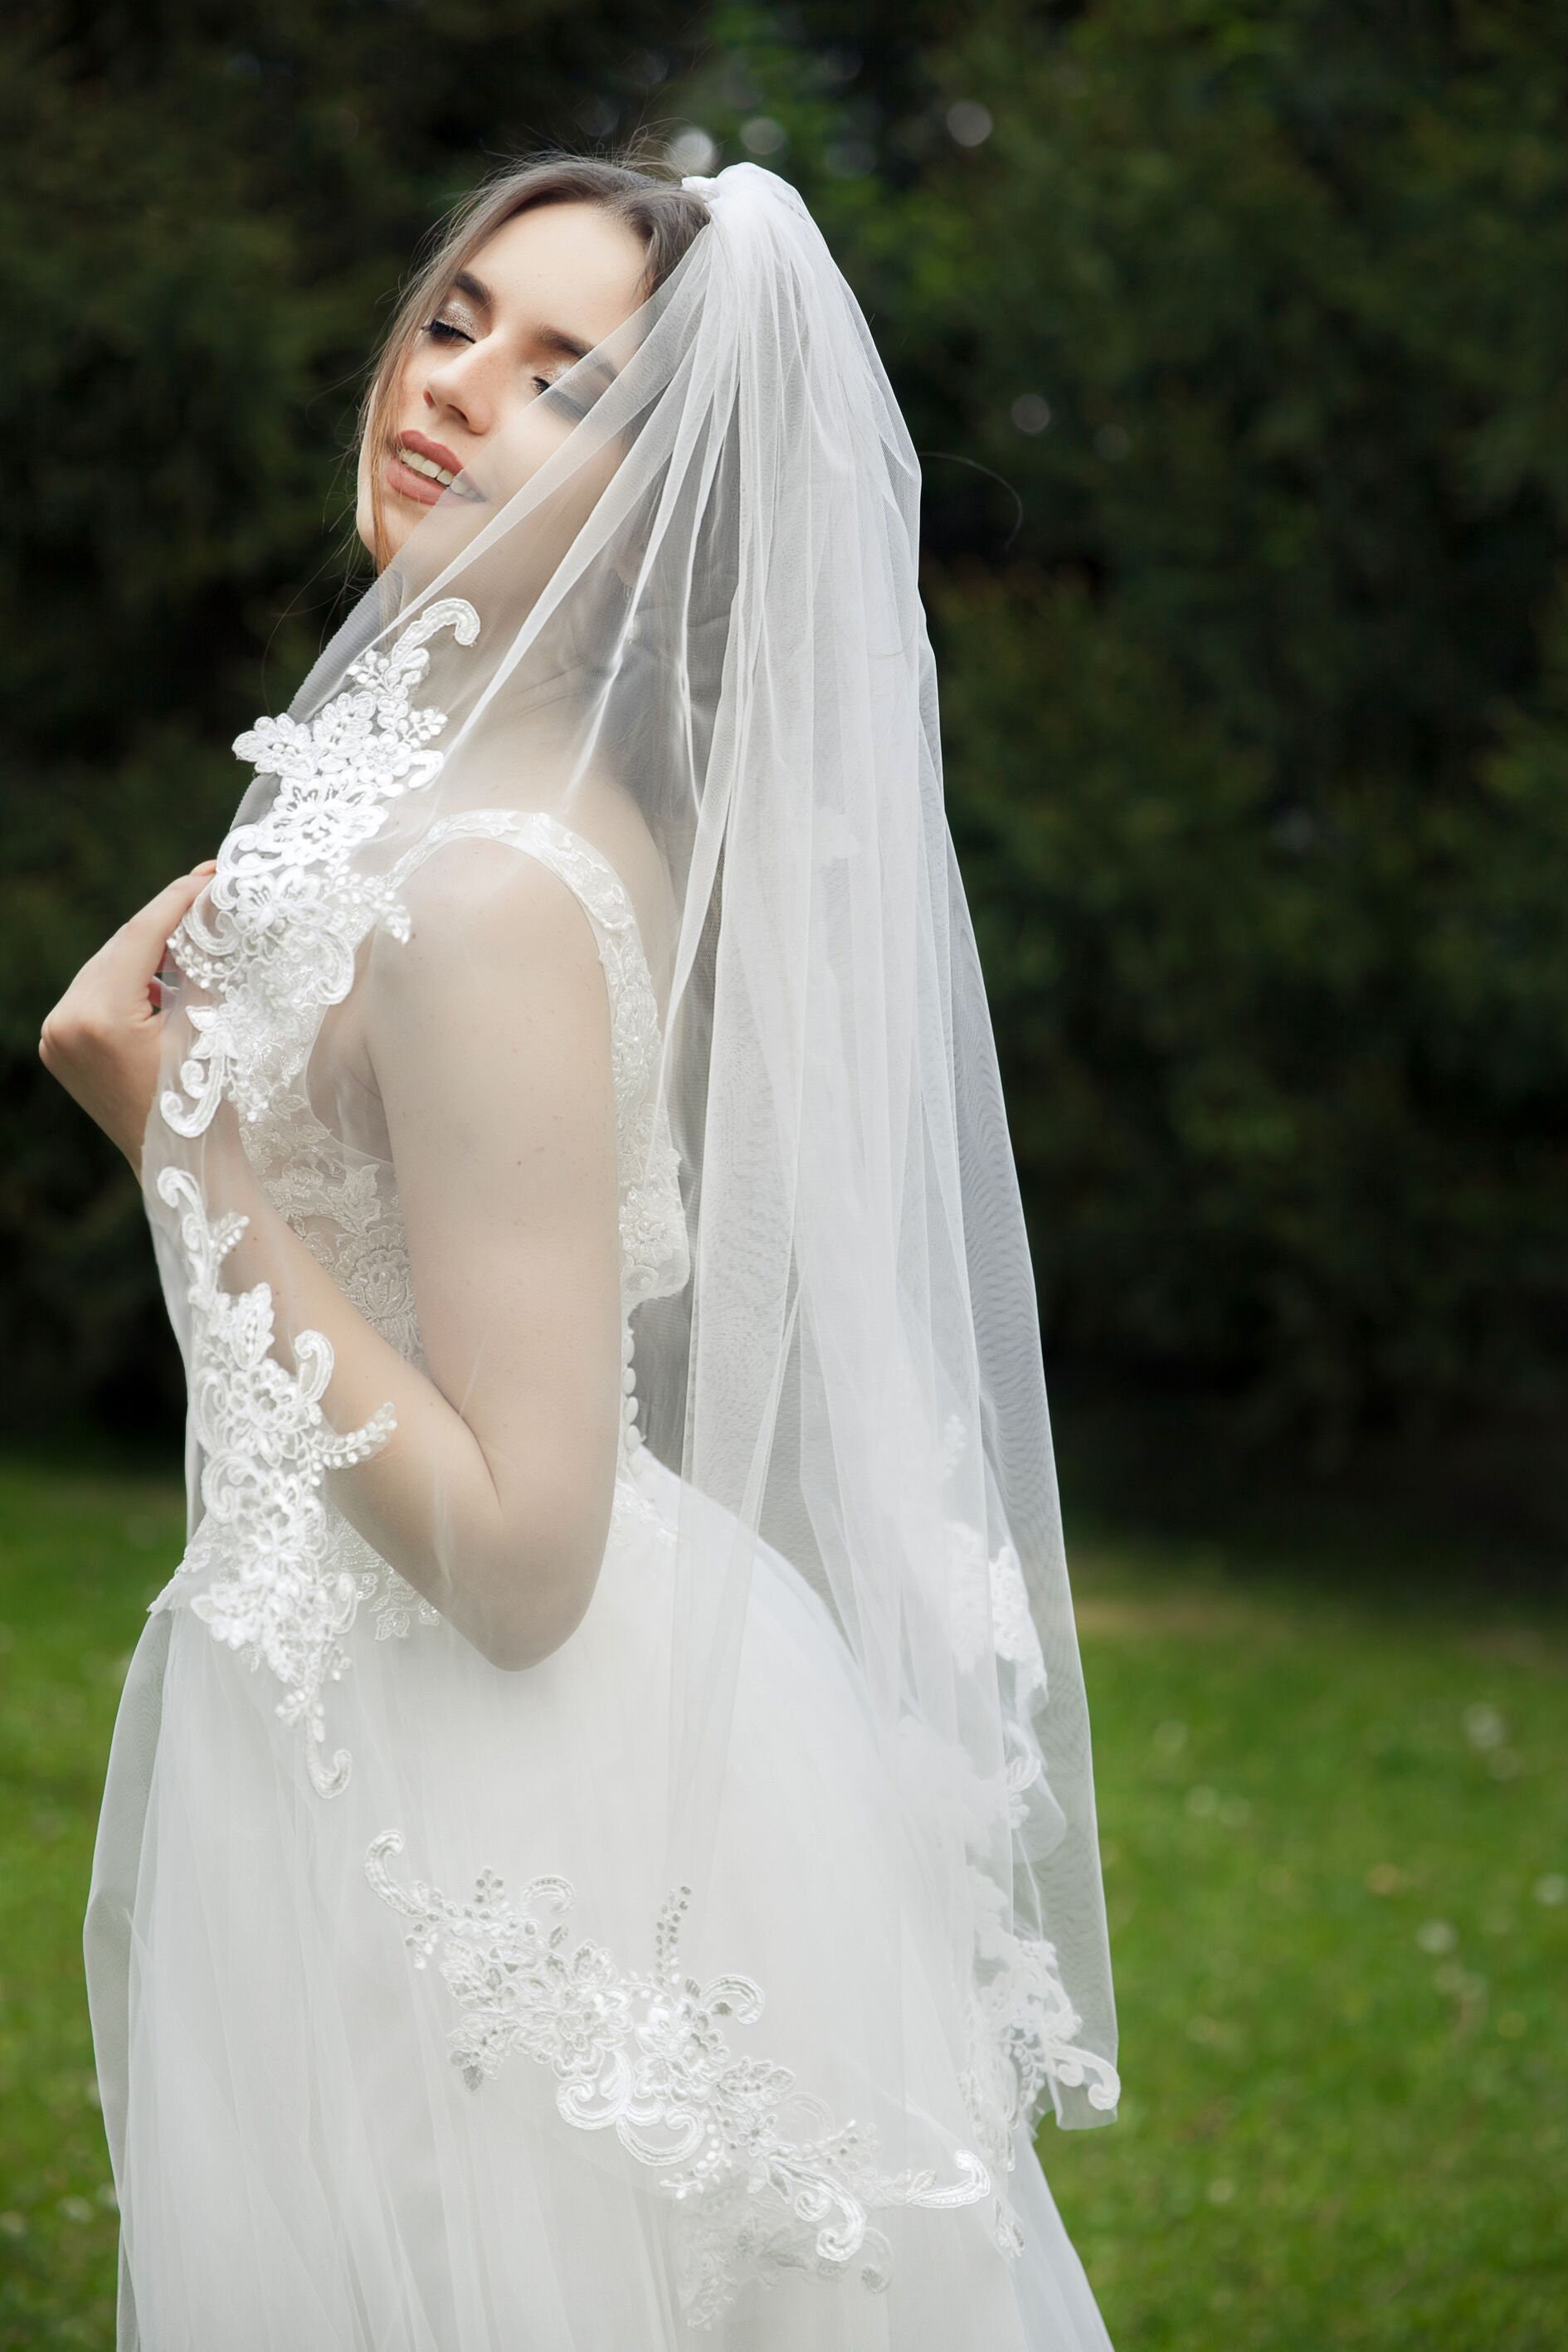 One Blushing Bride Fingertip Length Mantilla Wedding Veil with Beaded Lace Trim White / Fingertip 35-38 inch / No Beading